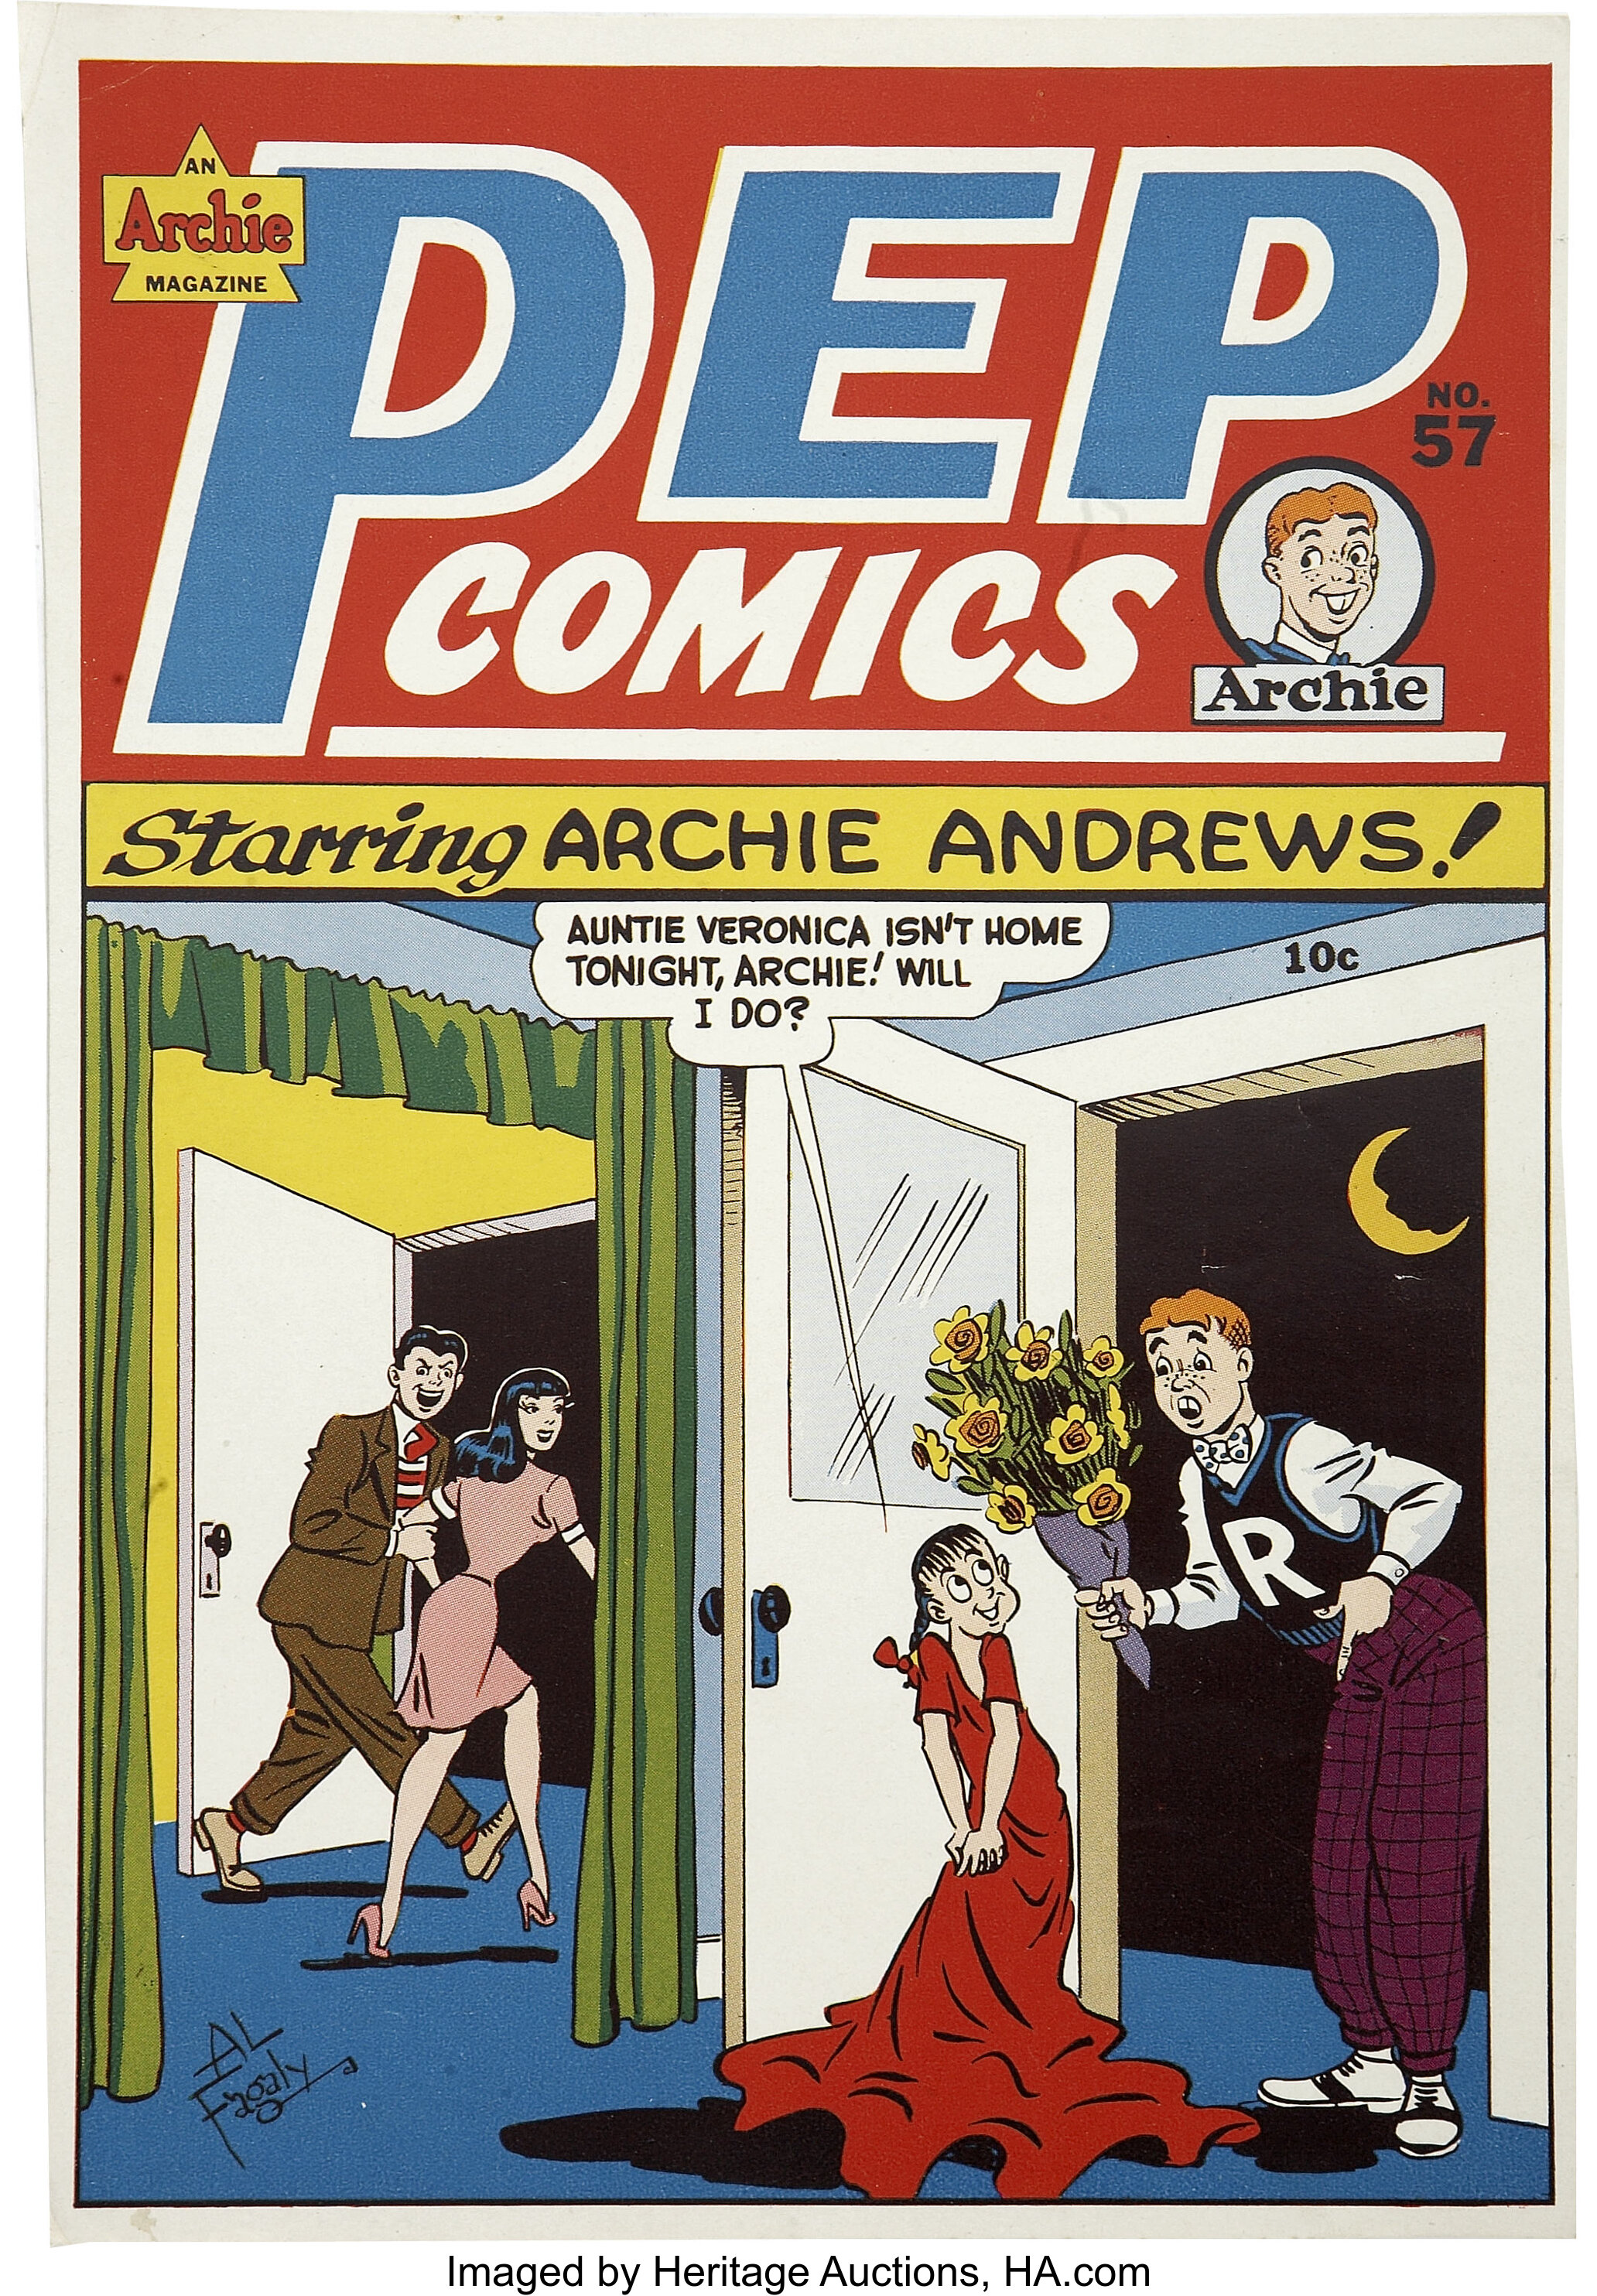 Al Fagaly Pep Comics 57 And 72 Publisher S Cover Proofs Lot Heritage Auctions